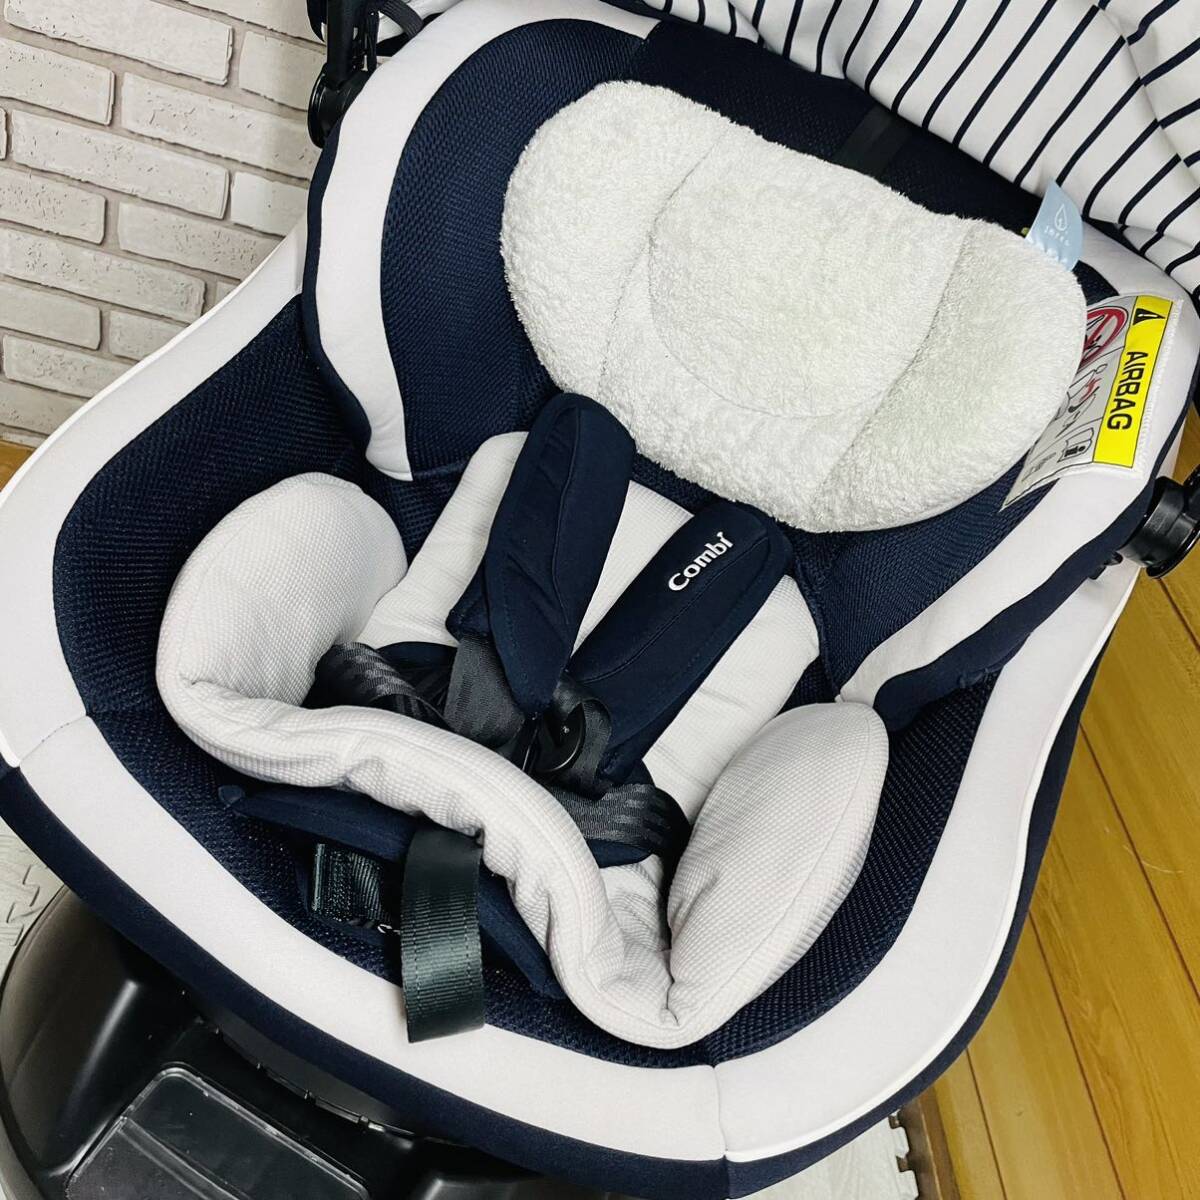  prompt decision use 4 months beautiful goods combikru Move Smart ISOFIX navy child seat postage included 5400 jpy . discounted lavatory settled combination Jk